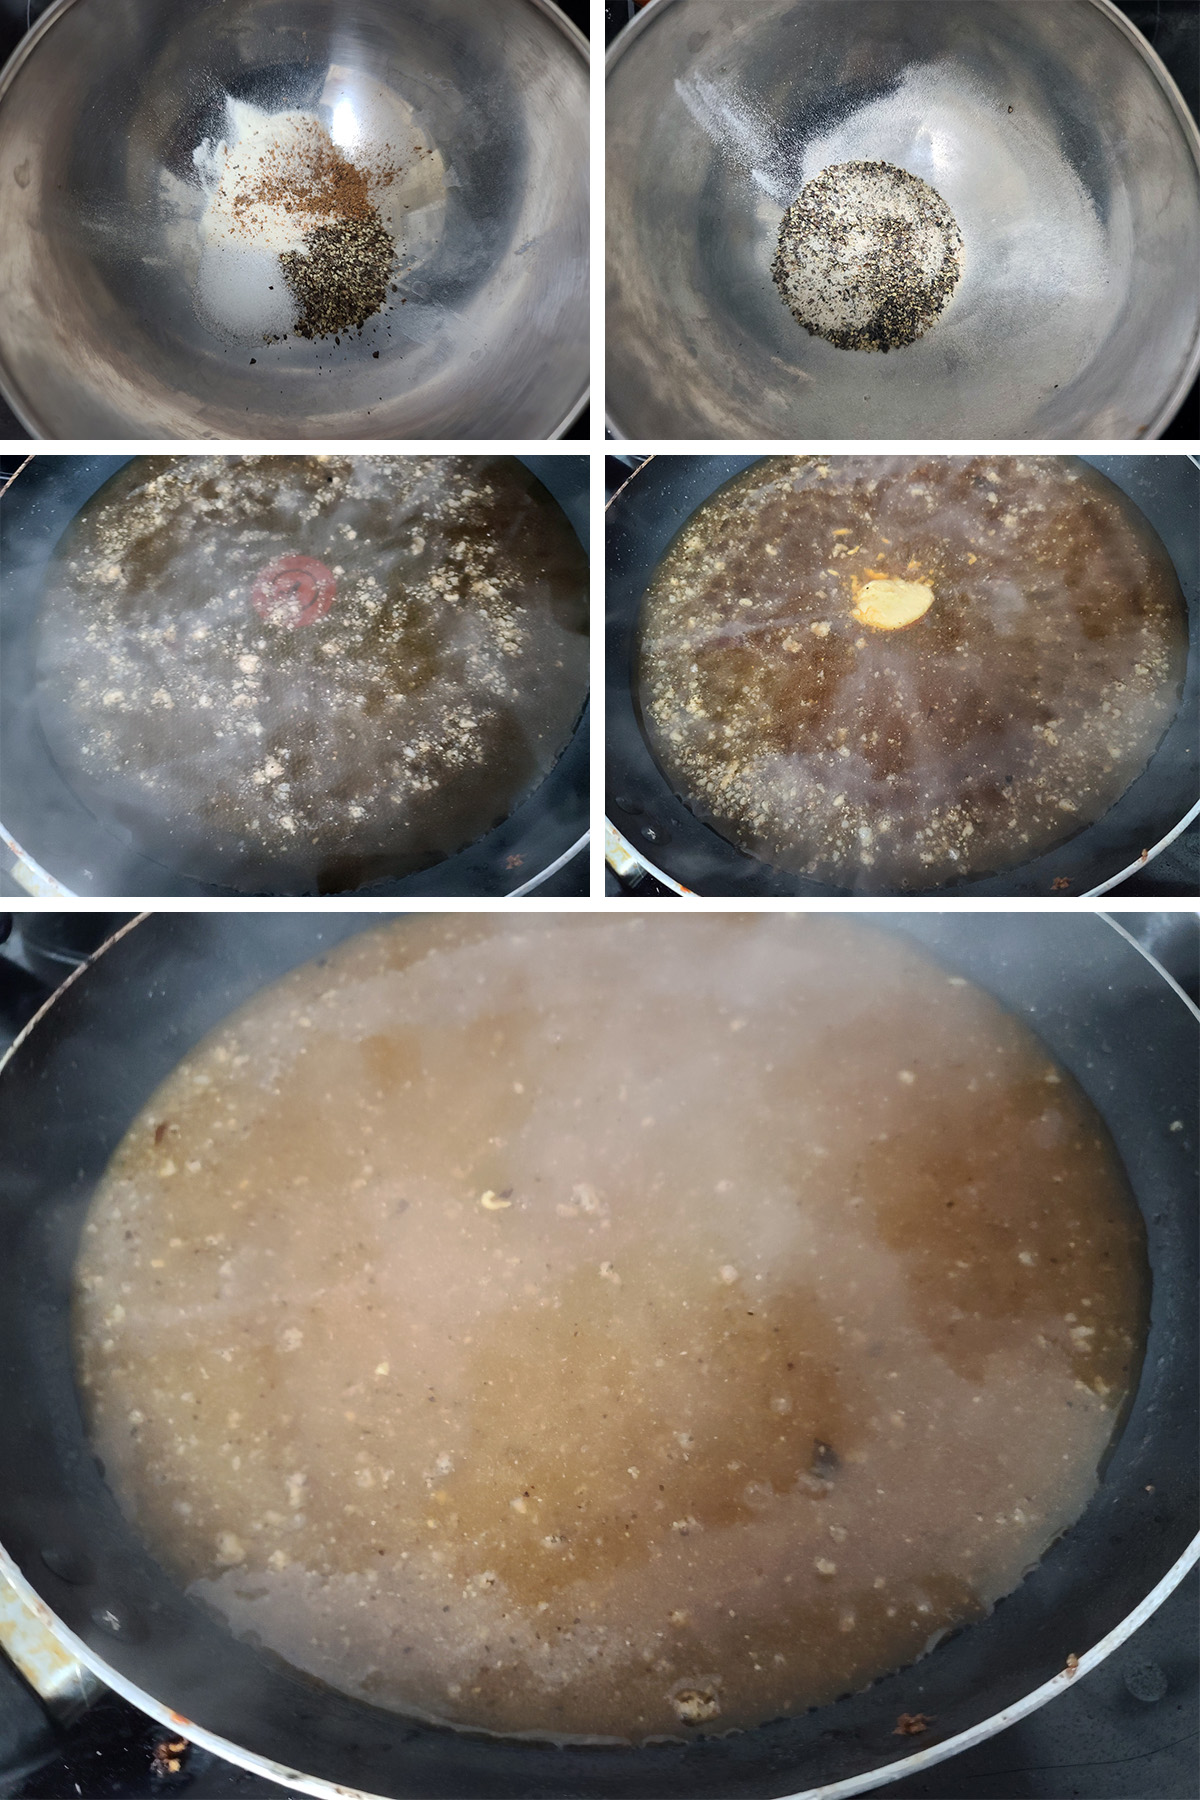 A 5 part image showing the start of the IKEA keto meatball sauce being made.